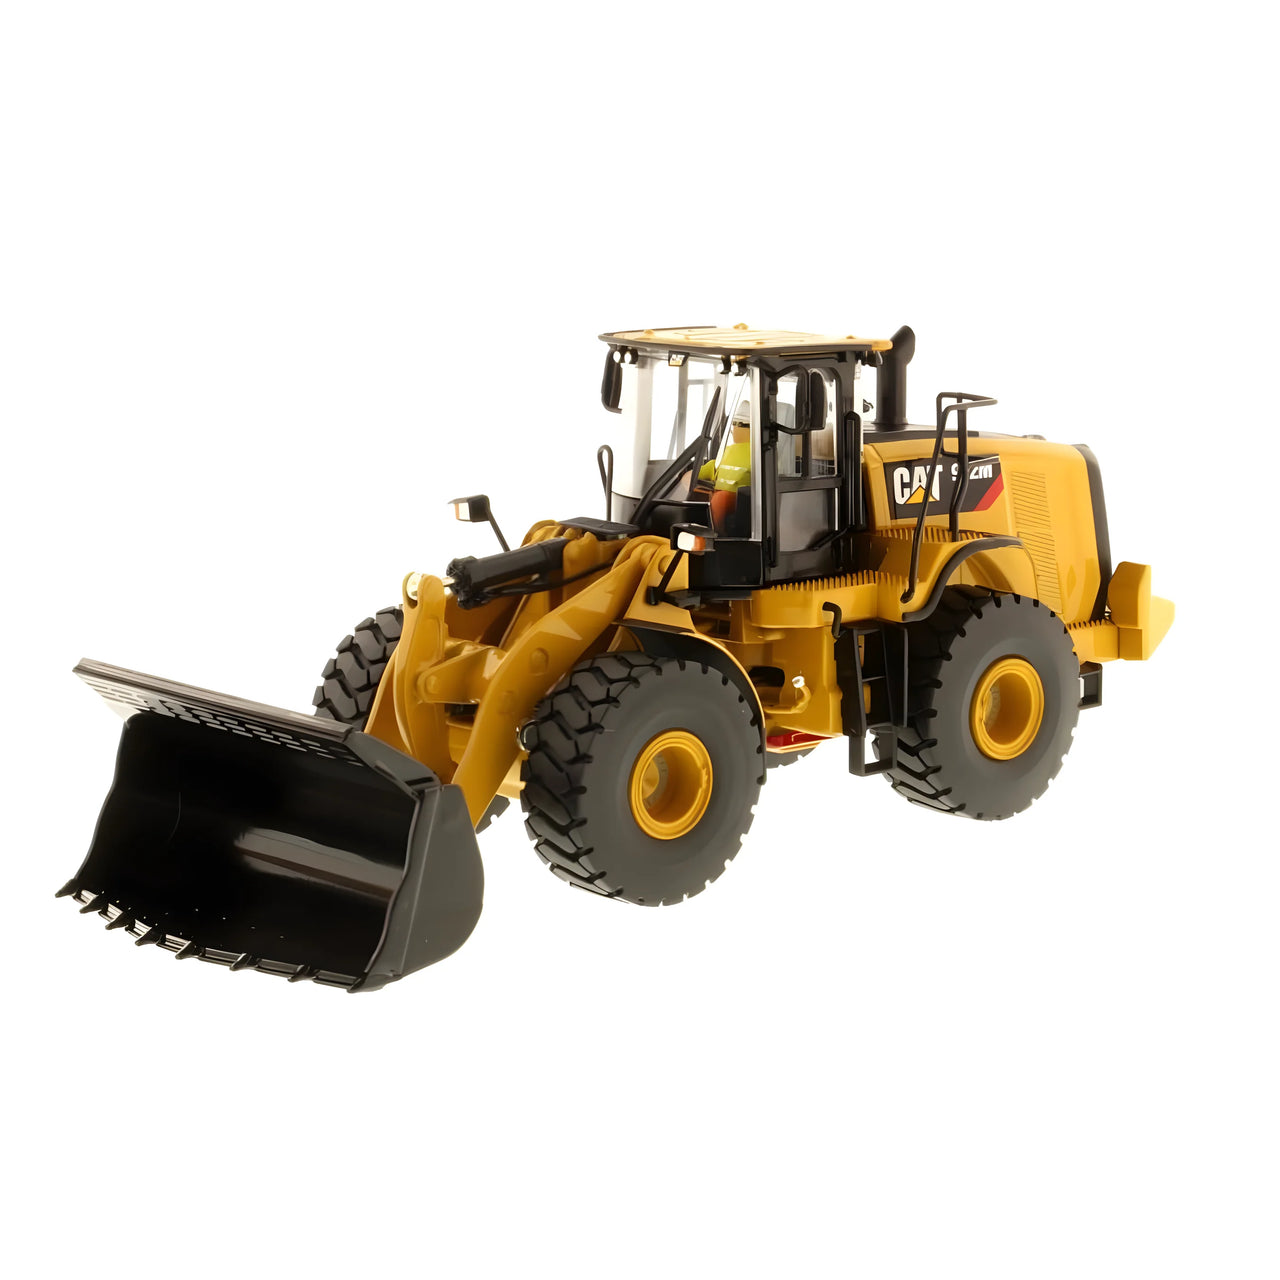 85927 Caterpillar 972M Wheel Loader 1:50 Scale (Discontinued Model)